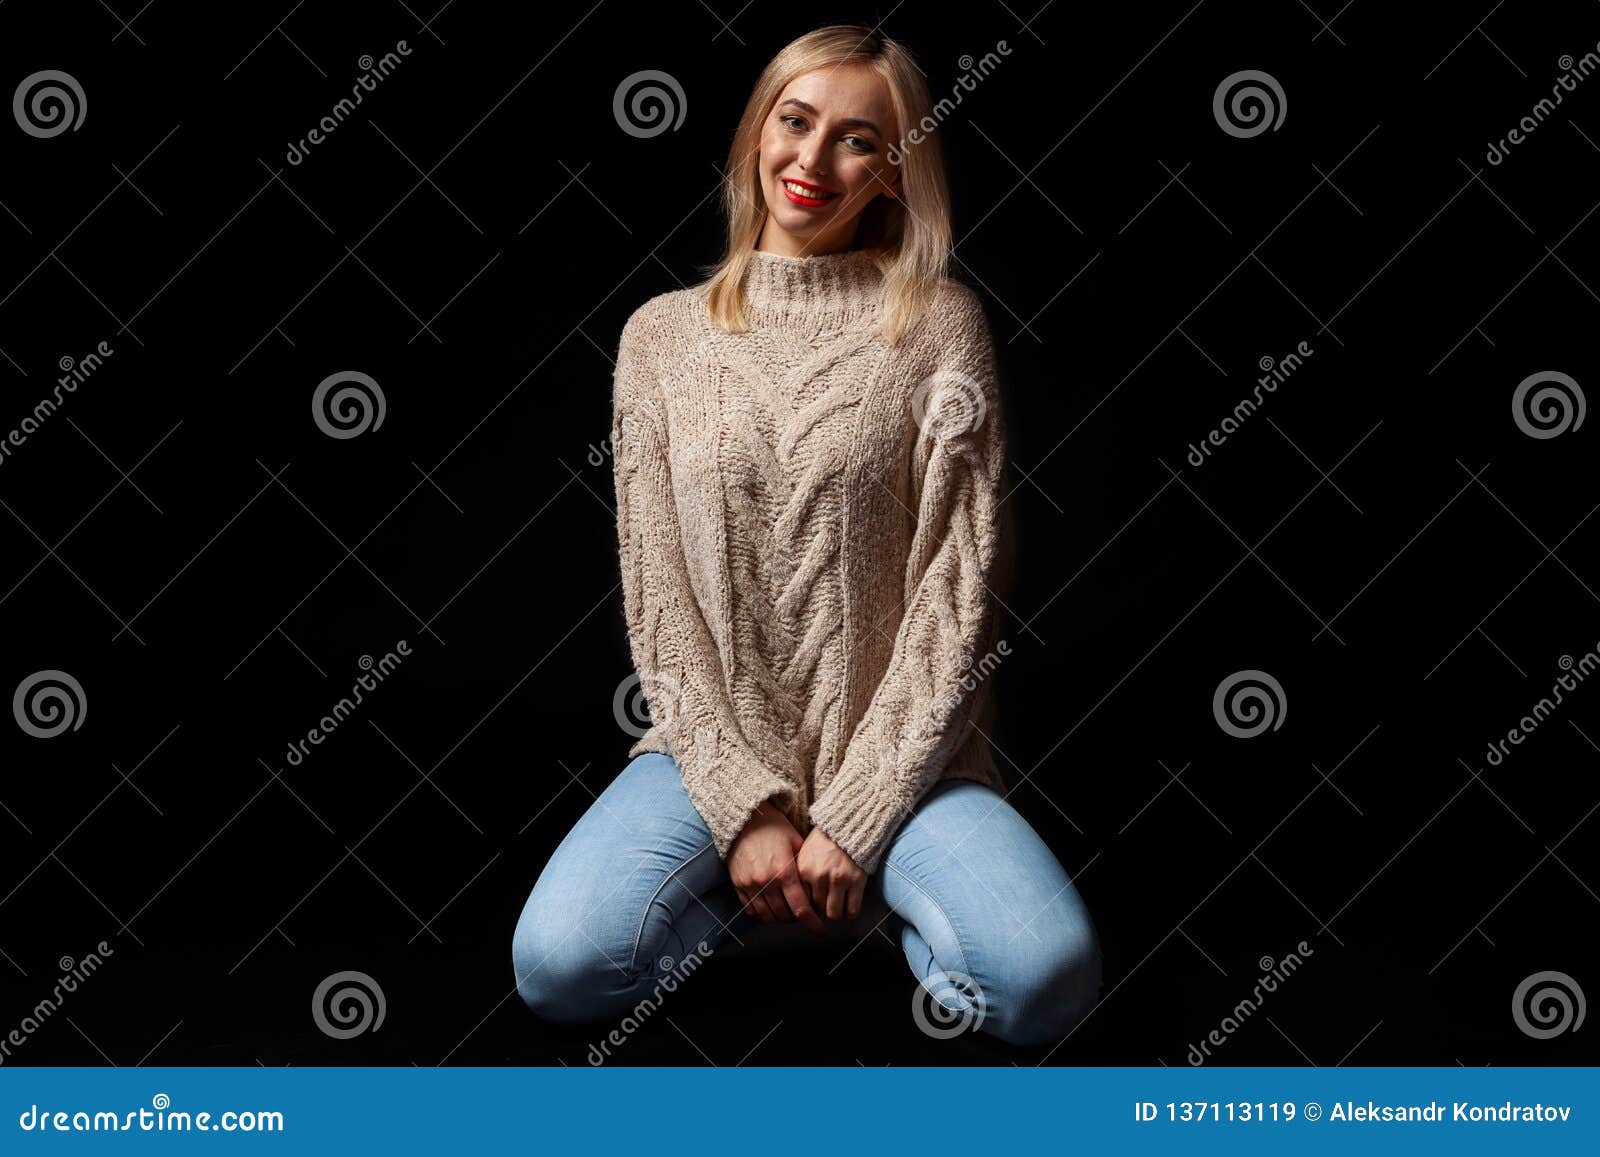 Young Beautiful Blonde Woman In Knitted Beige Sweater Blue Jeans Kneeling On The Floor With